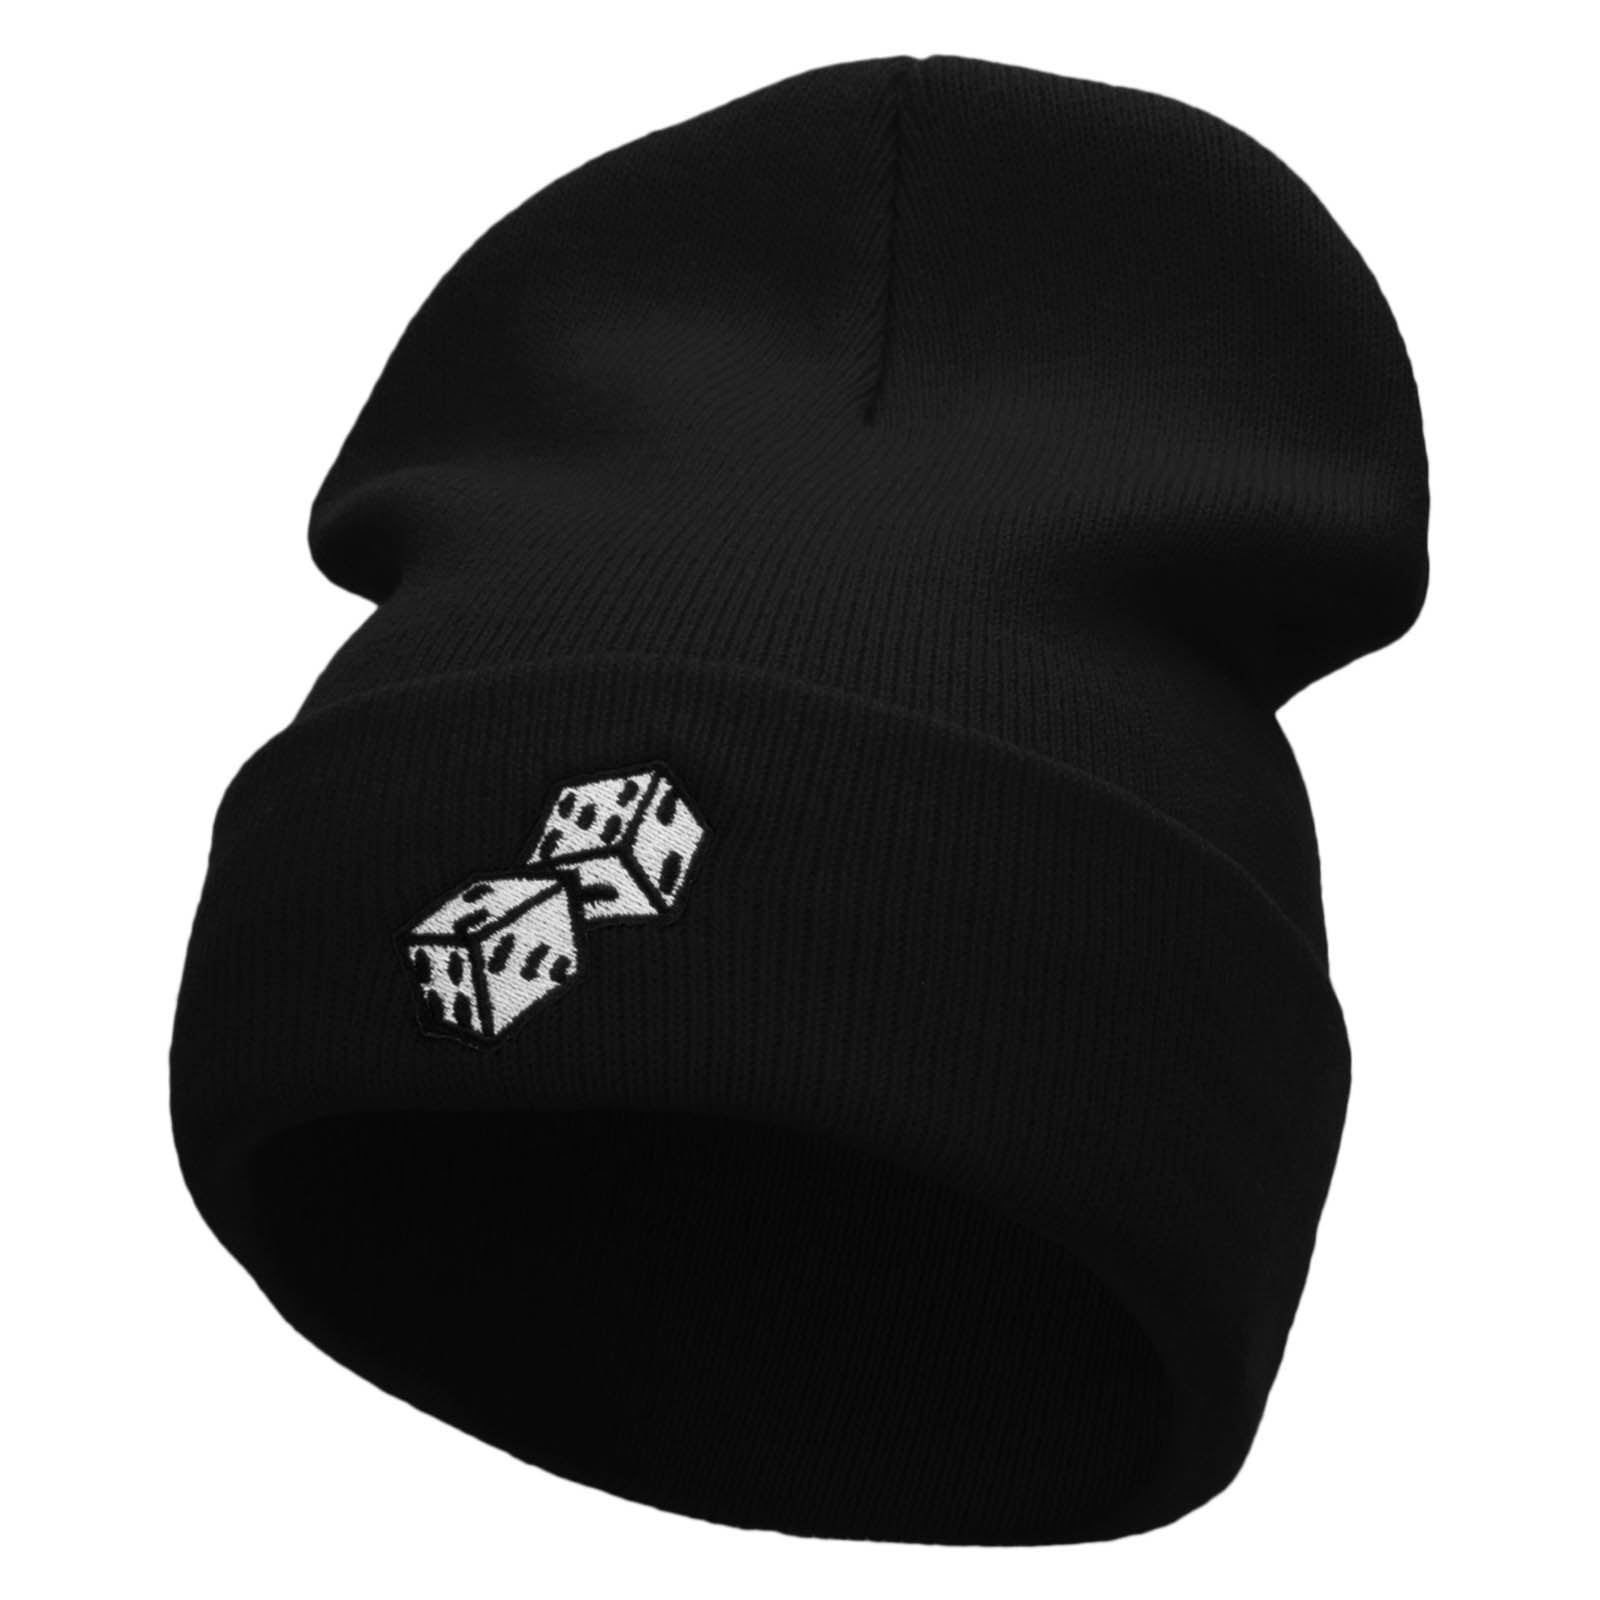 Thrown Dice Embroidered 12 Inch Long Knitted Beanie - Black OSFM